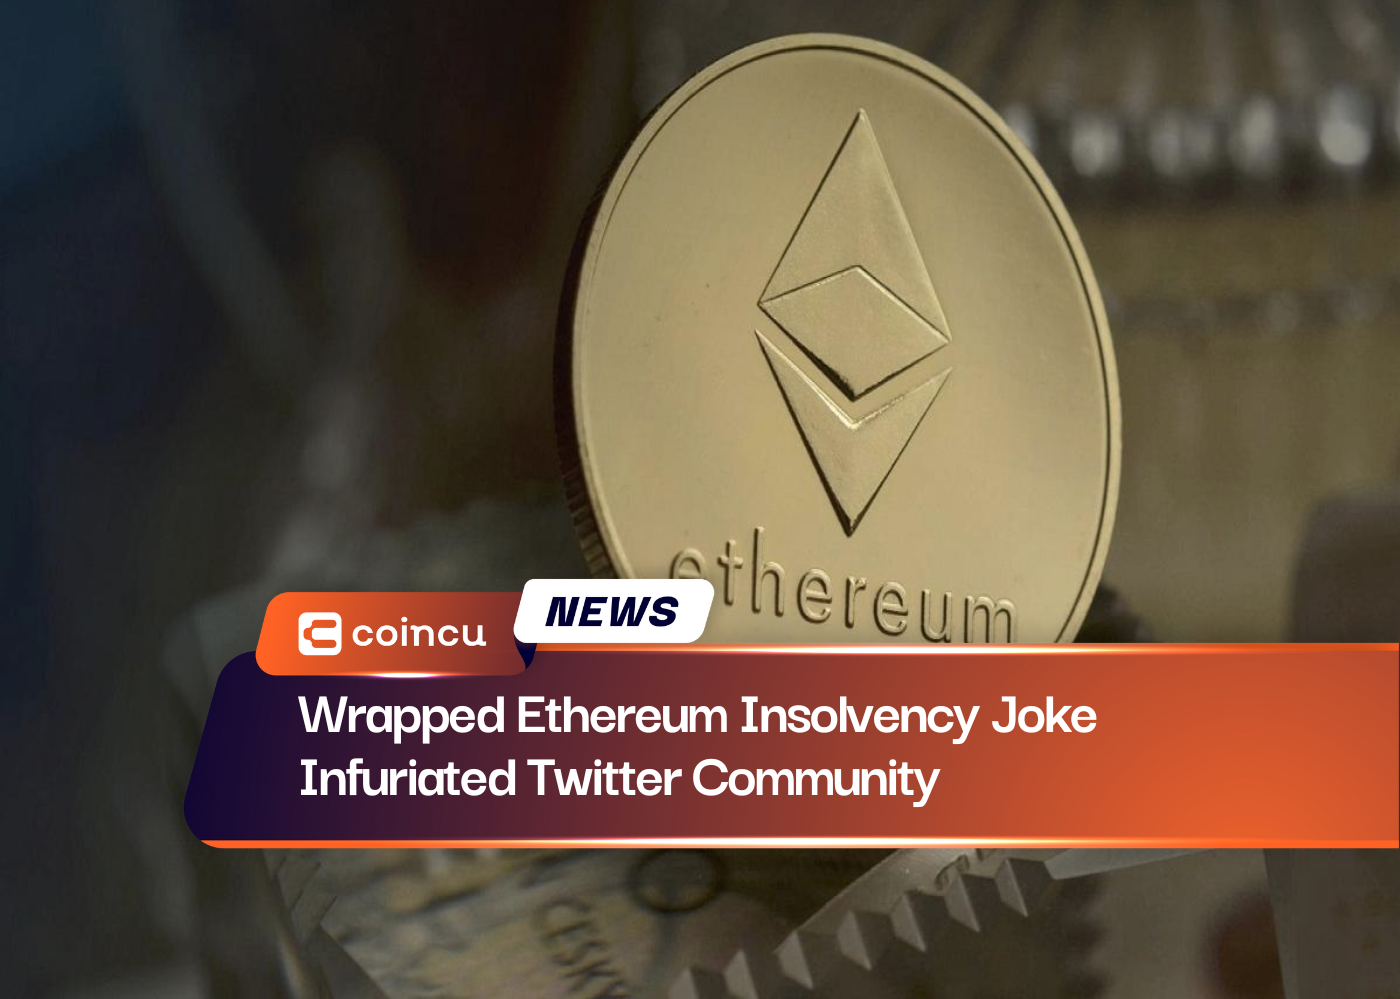 Wrapped Ethereum Insolvency Joke Infuriated Twitter Community